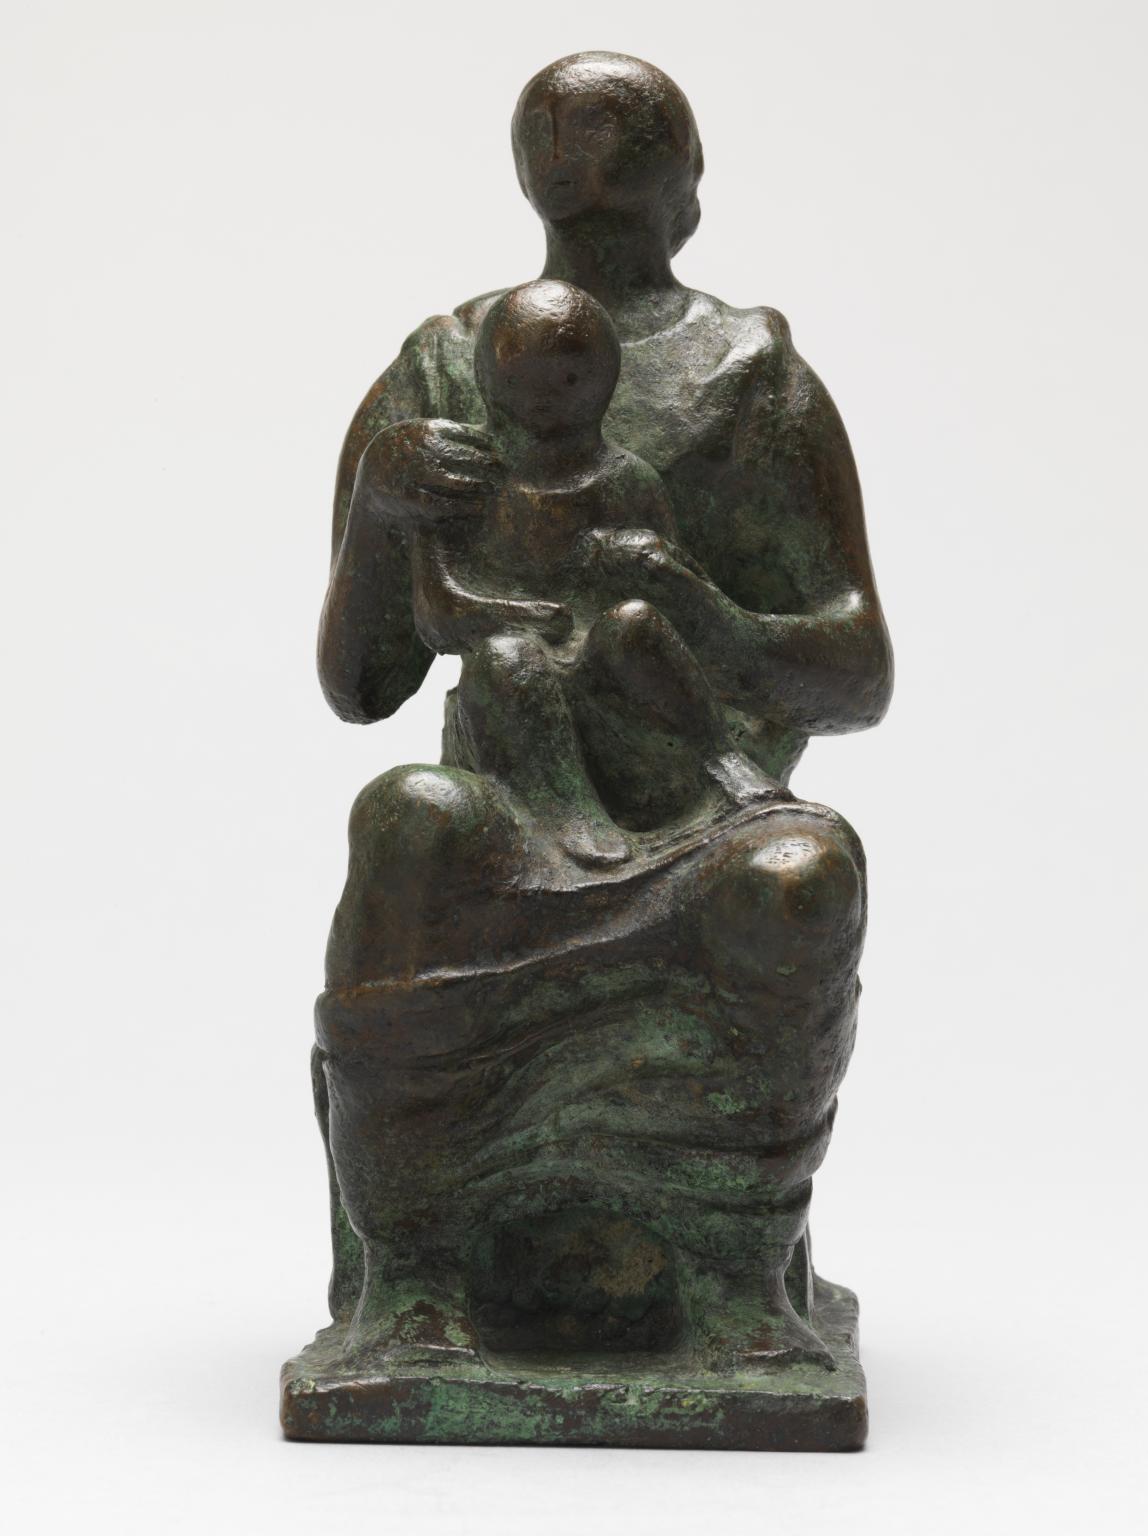 N05602: Maquette for Madonna and Child